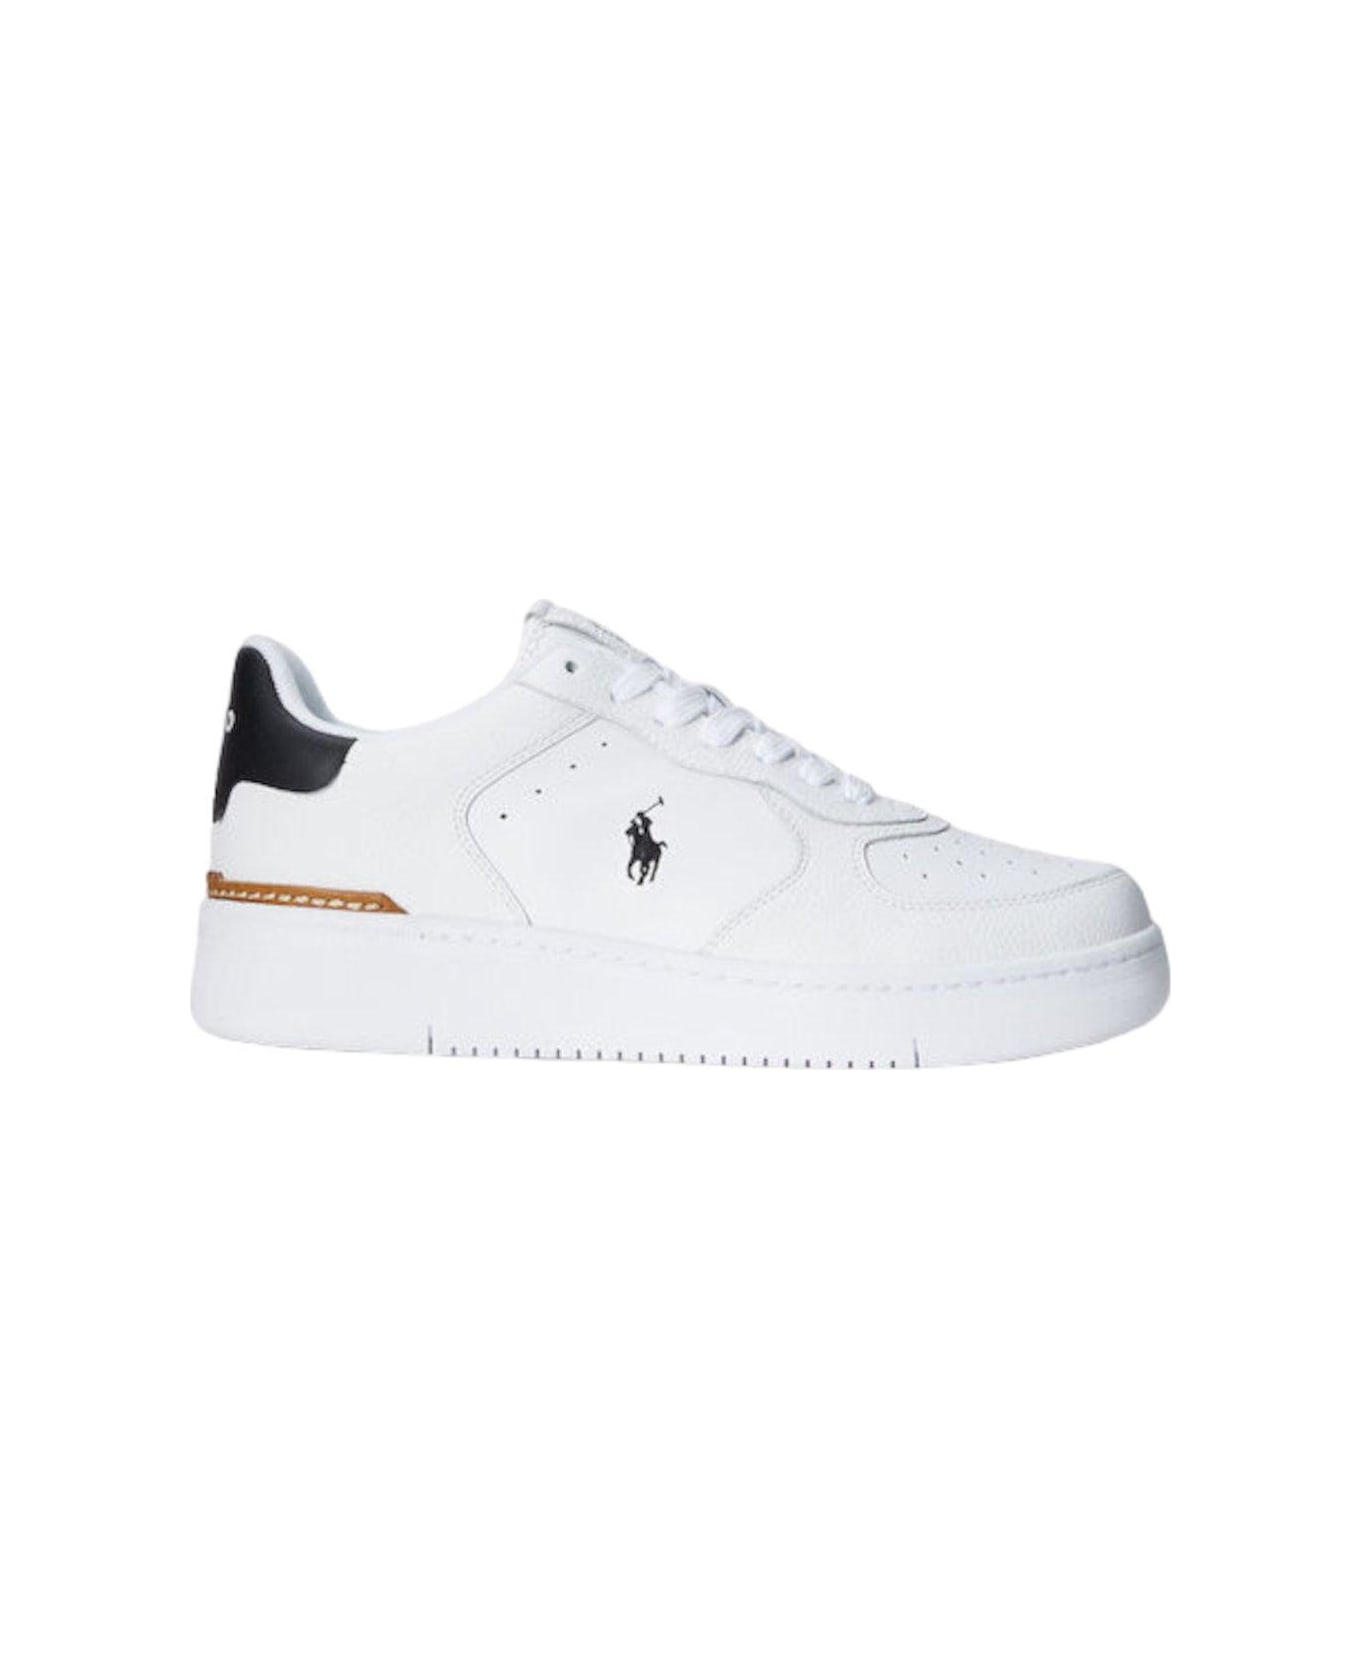 Polo Ralph Lauren Logo Printed Low-top Sneakers - White/blue